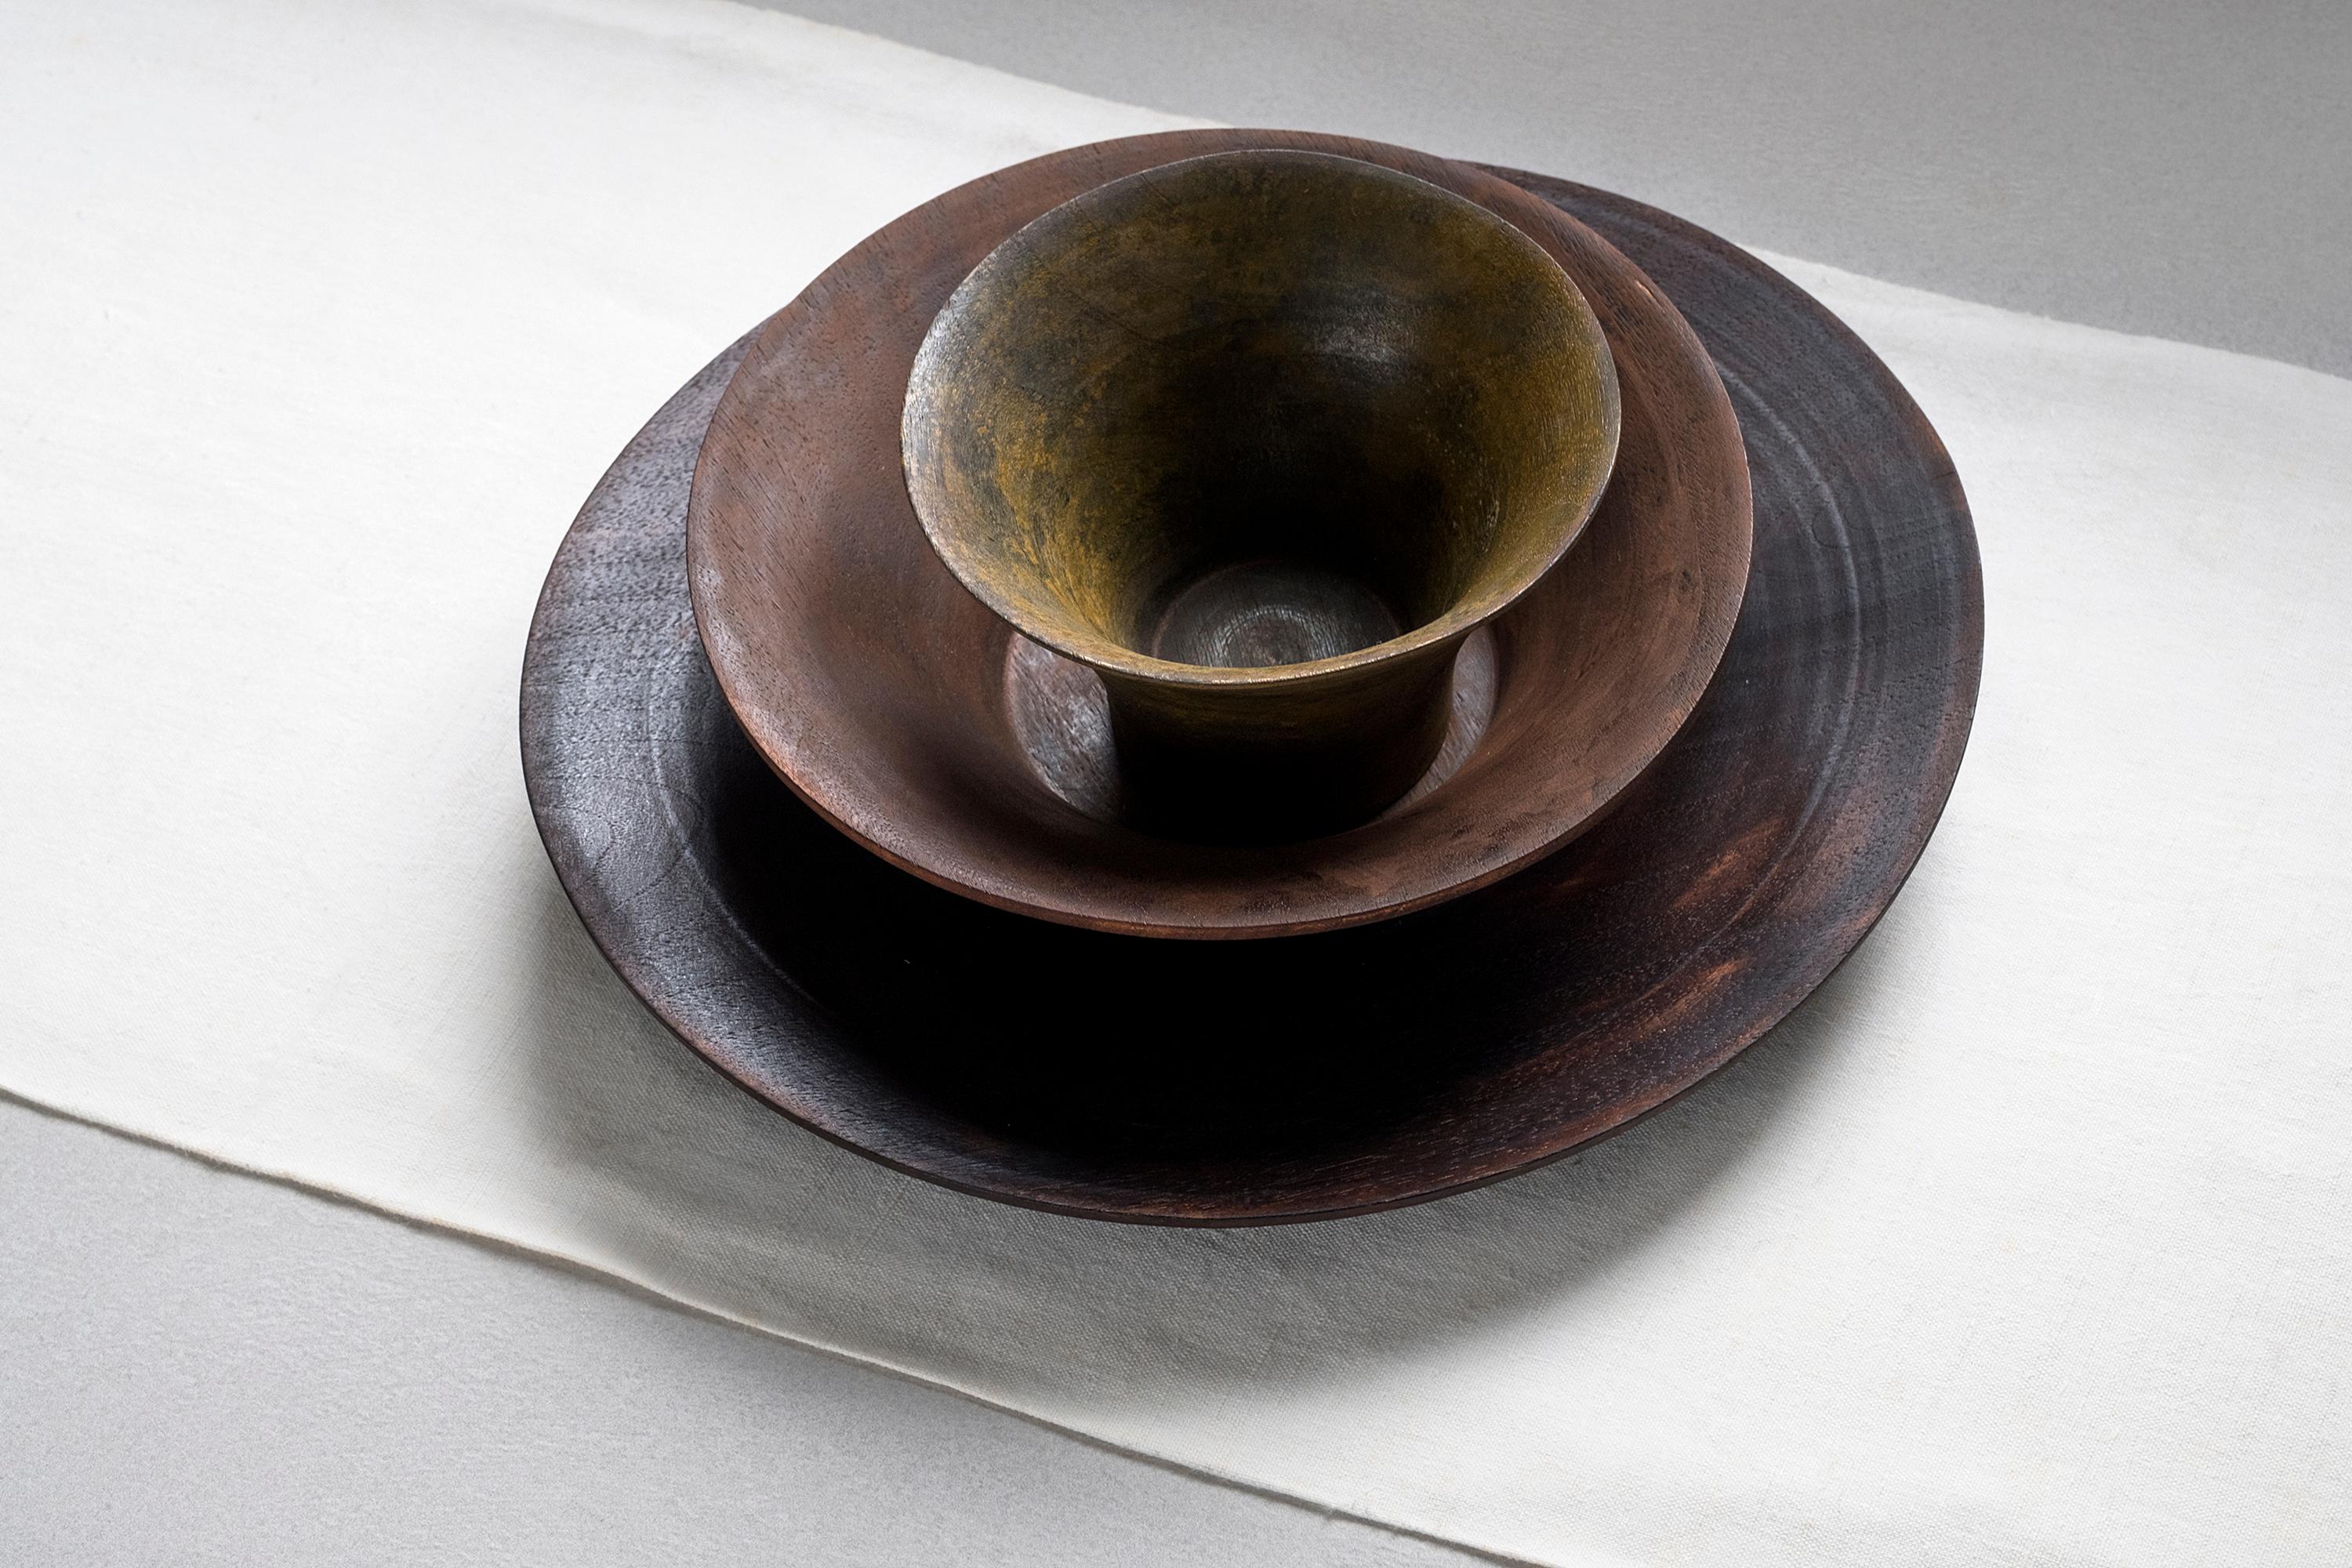 Coral is a set of irregular plate and bowls, masterfully turned with thin thicknesses. The three pieces are made of walnut wood, colored by finishes starting from metal oxides, that twist the material’s perception of the object. This table set is